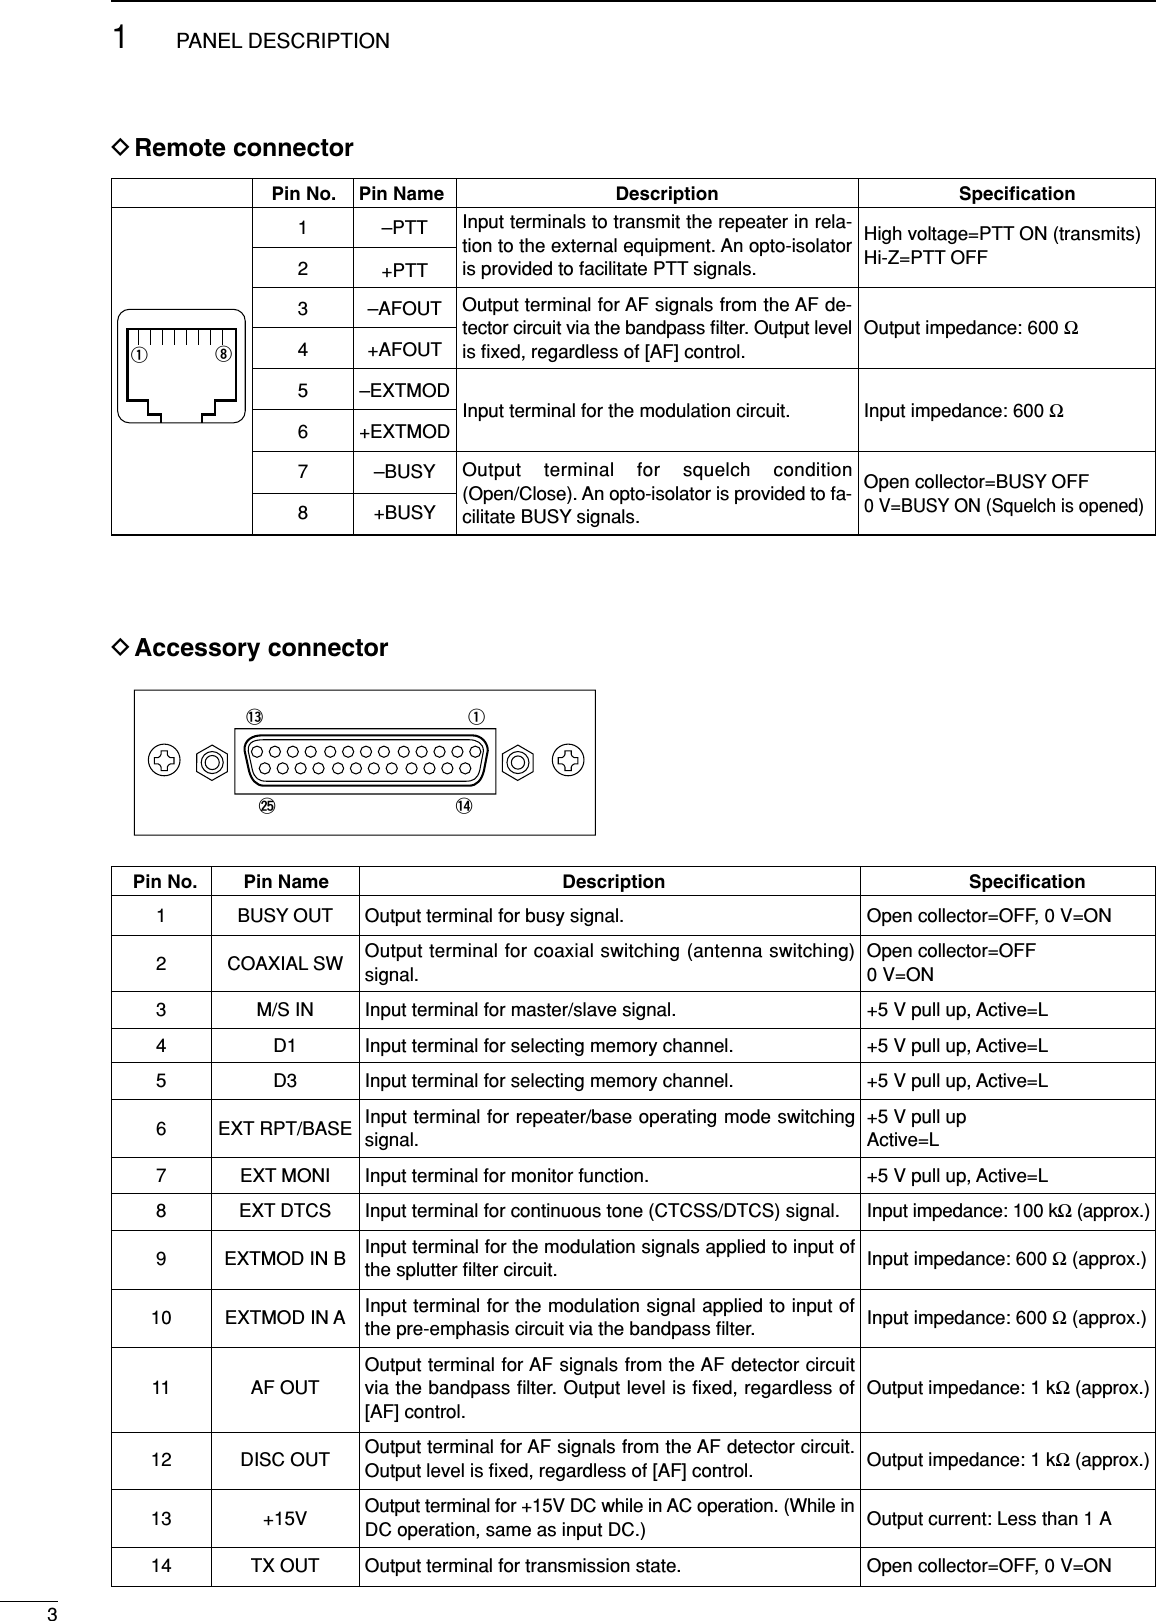 31PANEL DESCRIPTIONDRemote connectorPin No. Pin Name Description Speciﬁcation12345678–PTT+PTT–AFOUT+AFOUT–EXTMOD+EXTMOD–BUSY+BUSYInput terminals to transmit the repeater in rela-tion to the external equipment. An opto-isolatoris provided to facilitate PTT signals.Output terminal for AF signals from the AF de-tector circuit via the bandpass ﬁlter. Output levelis ﬁxed, regardless of [AF] control.Input terminal for the modulation circuit.Output terminal for squelch condition(Open/Close). An opto-isolator is provided to fa-cilitate BUSY signals.High voltage=PTT ON (transmits)Hi-Z=PTT OFFOutput impedance: 600 ΩInput impedance: 600 ΩOpen collector=BUSY OFF0 V=BUSY ON (Squelch is opened)qiDAccessory connectorPin No. Pin Name Description Speciﬁcation1234567891011121314BUSY OUTCOAXIAL SWM/S IND1D3EXT RPT/BASEEXT MONIEXT DTCSEXTMOD IN BEXTMOD IN AAF OUTDISC OUT+15VTX OUTOutput terminal for busy signal.Output terminal for coaxial switching (antenna switching)signal.Input terminal for master/slave signal.Input terminal for selecting memory channel.Input terminal for selecting memory channel.Input terminal for repeater/base operating mode switchingsignal.Input terminal for monitor function.Input terminal for continuous tone (CTCSS/DTCS) signal.Input terminal for the modulation signals applied to input ofthe splutter ﬁlter circuit.Input terminal for the modulation signal applied to input ofthe pre-emphasis circuit via the bandpass ﬁlter.Output terminal for AF signals from the AF detector circuitvia the bandpass ﬁlter. Output level is ﬁxed, regardless of[AF] control.Output terminal for AF signals from the AF detector circuit.Output level is ﬁxed, regardless of [AF] control.Output terminal for +15V DC while in AC operation. (While inDC operation, same as input DC.)Output terminal for transmission state.Open collector=OFF, 0 V=ONOpen collector=OFF0 V=ON+5 V pull up, Active=L+5 V pull up, Active=L+5 V pull up, Active=L+5 V pull upActive=L+5 V pull up, Active=LInput impedance: 100 kΩ(approx.)Input impedance: 600 Ω(approx.)Input impedance: 600 Ω(approx.)Output impedance: 1 kΩ(approx.)Output impedance: 1 kΩ(approx.)Output current: Less than 1 AOpen collector=OFF, 0 V=ONq!3!4@5